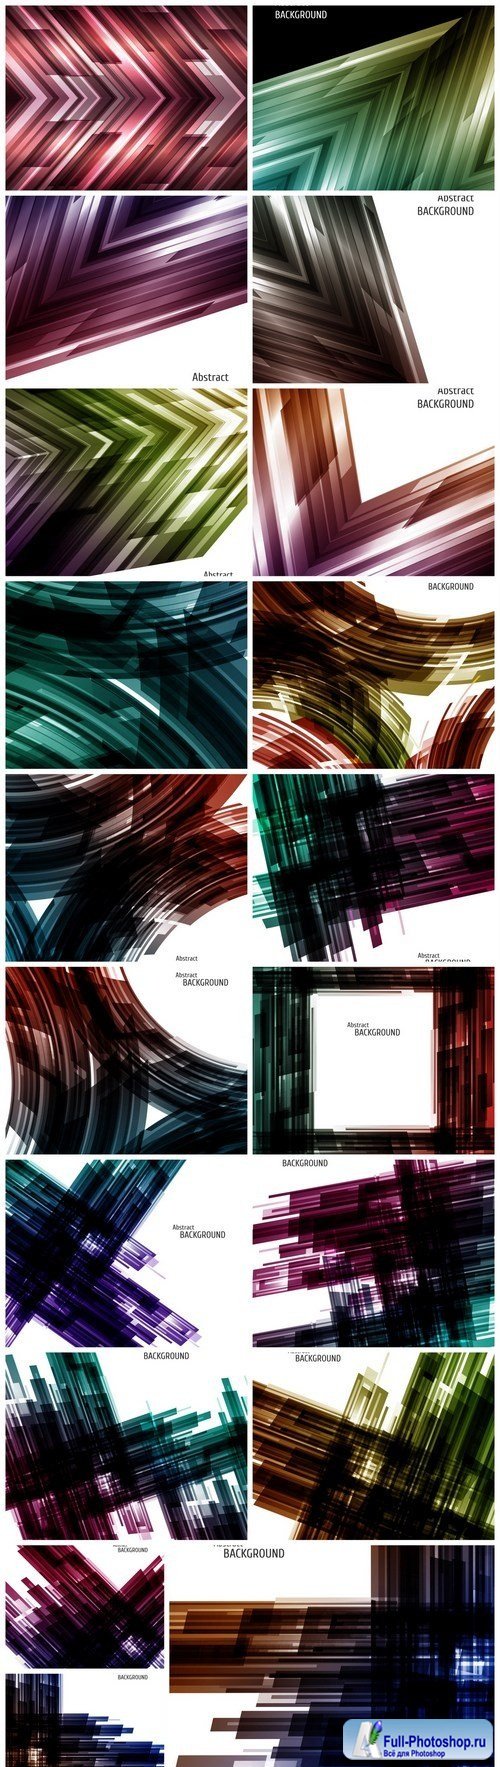 Abstract grunge backgrounds - 19xEPS